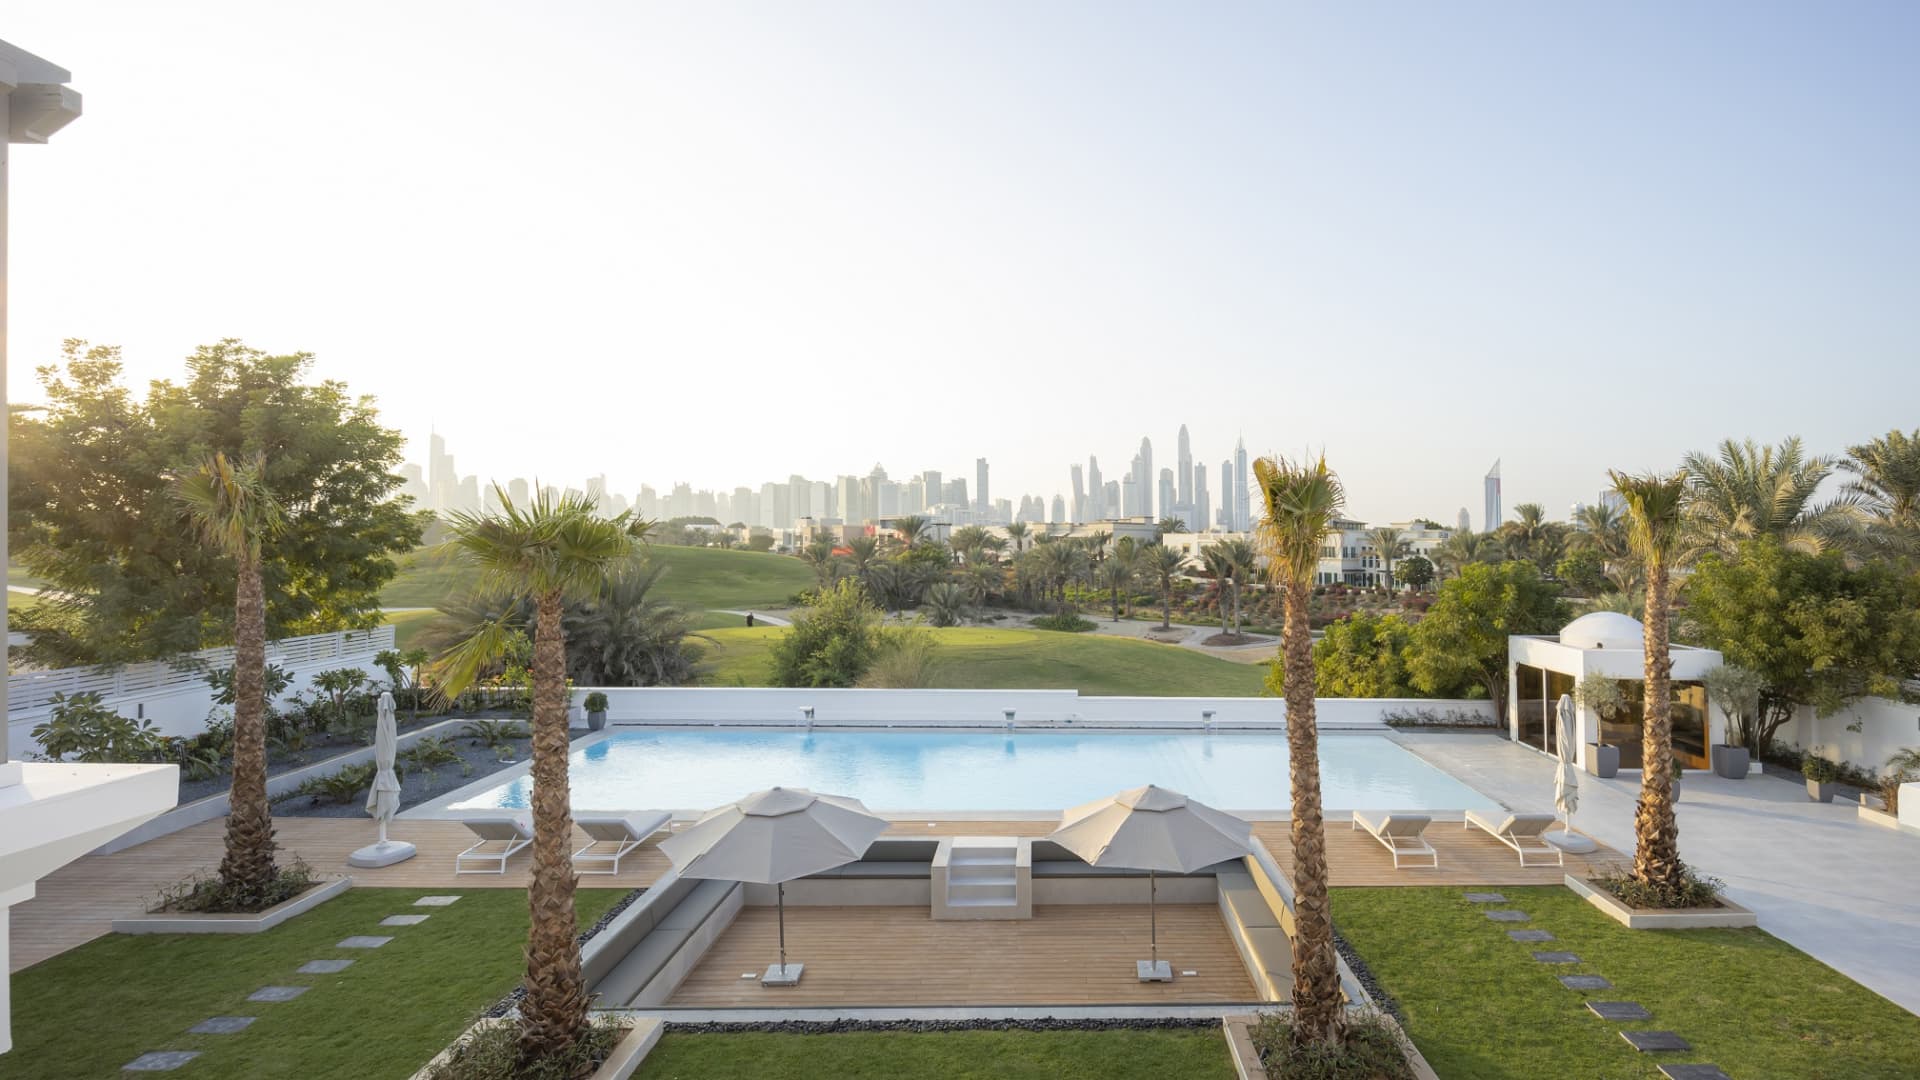 Vacation rentals across Middle East look to capitalize on ‘revenge tourism’